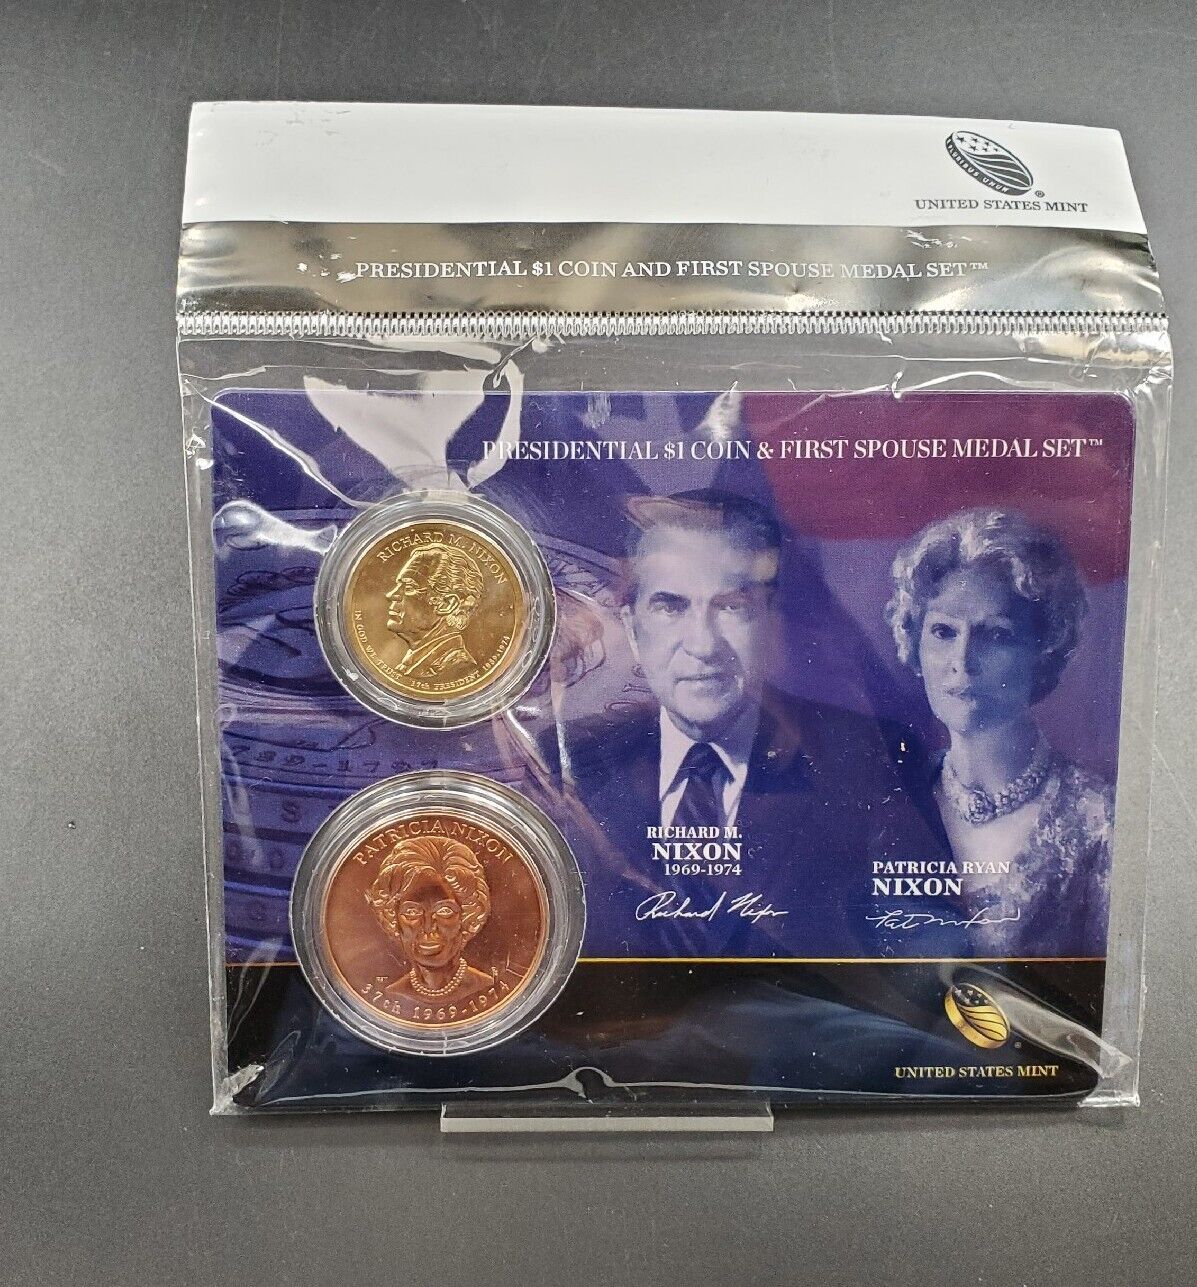 2016 Richard Nixon & Patricia1 Presidential Coin First Spouse Medal Sealed OGP